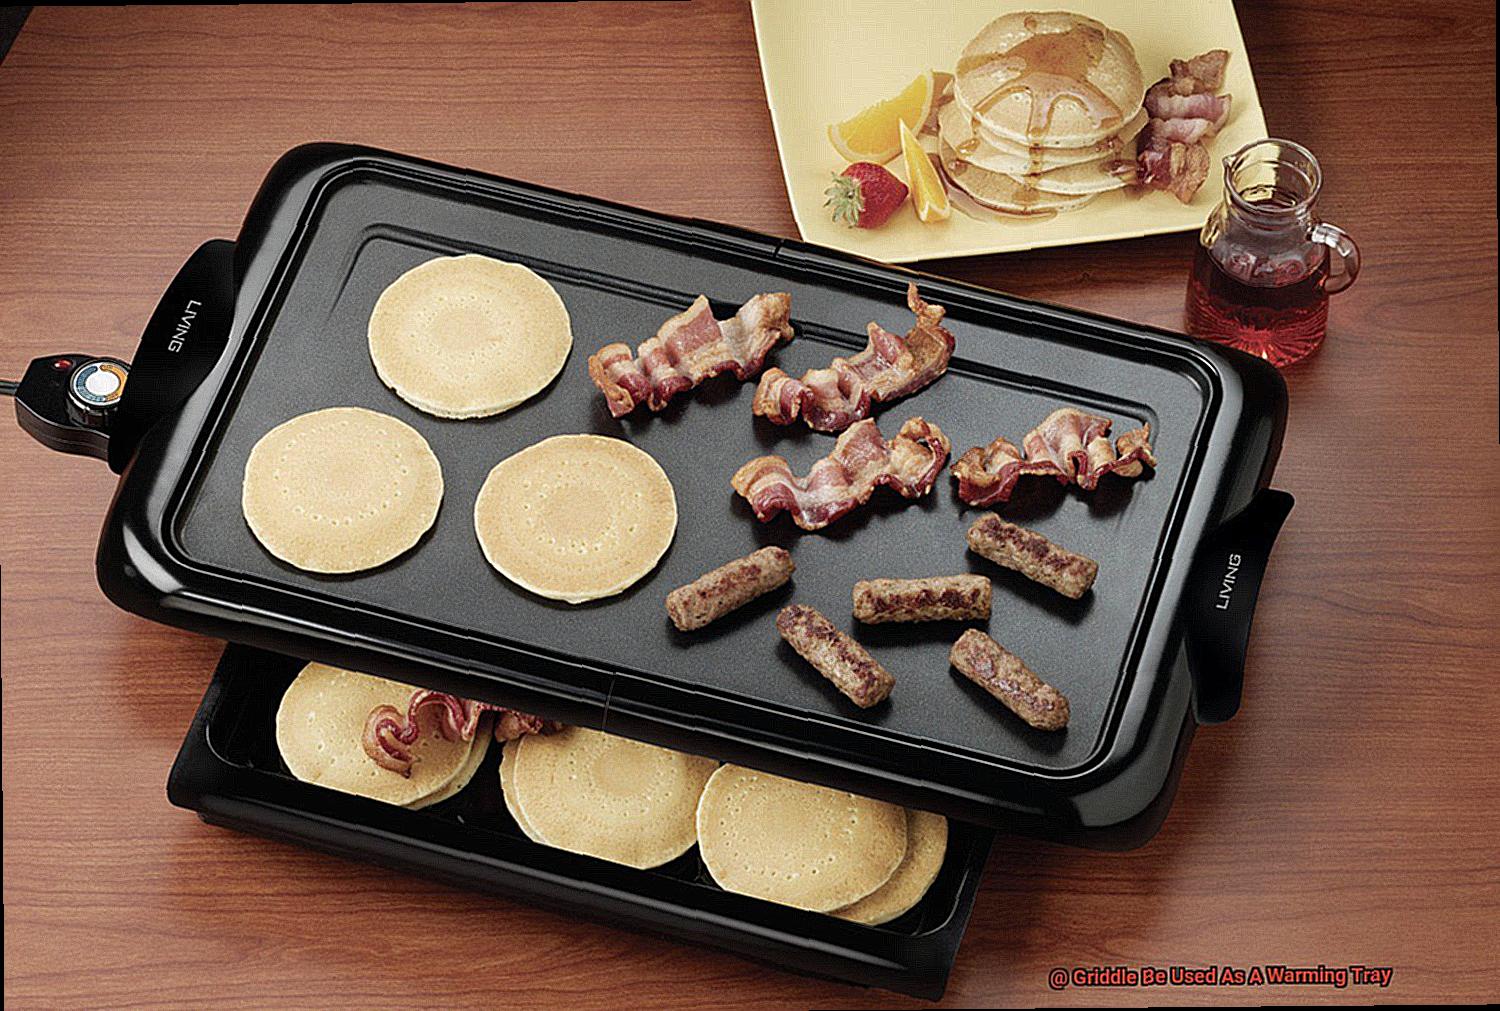 Griddle Be Used As A Warming Tray-4